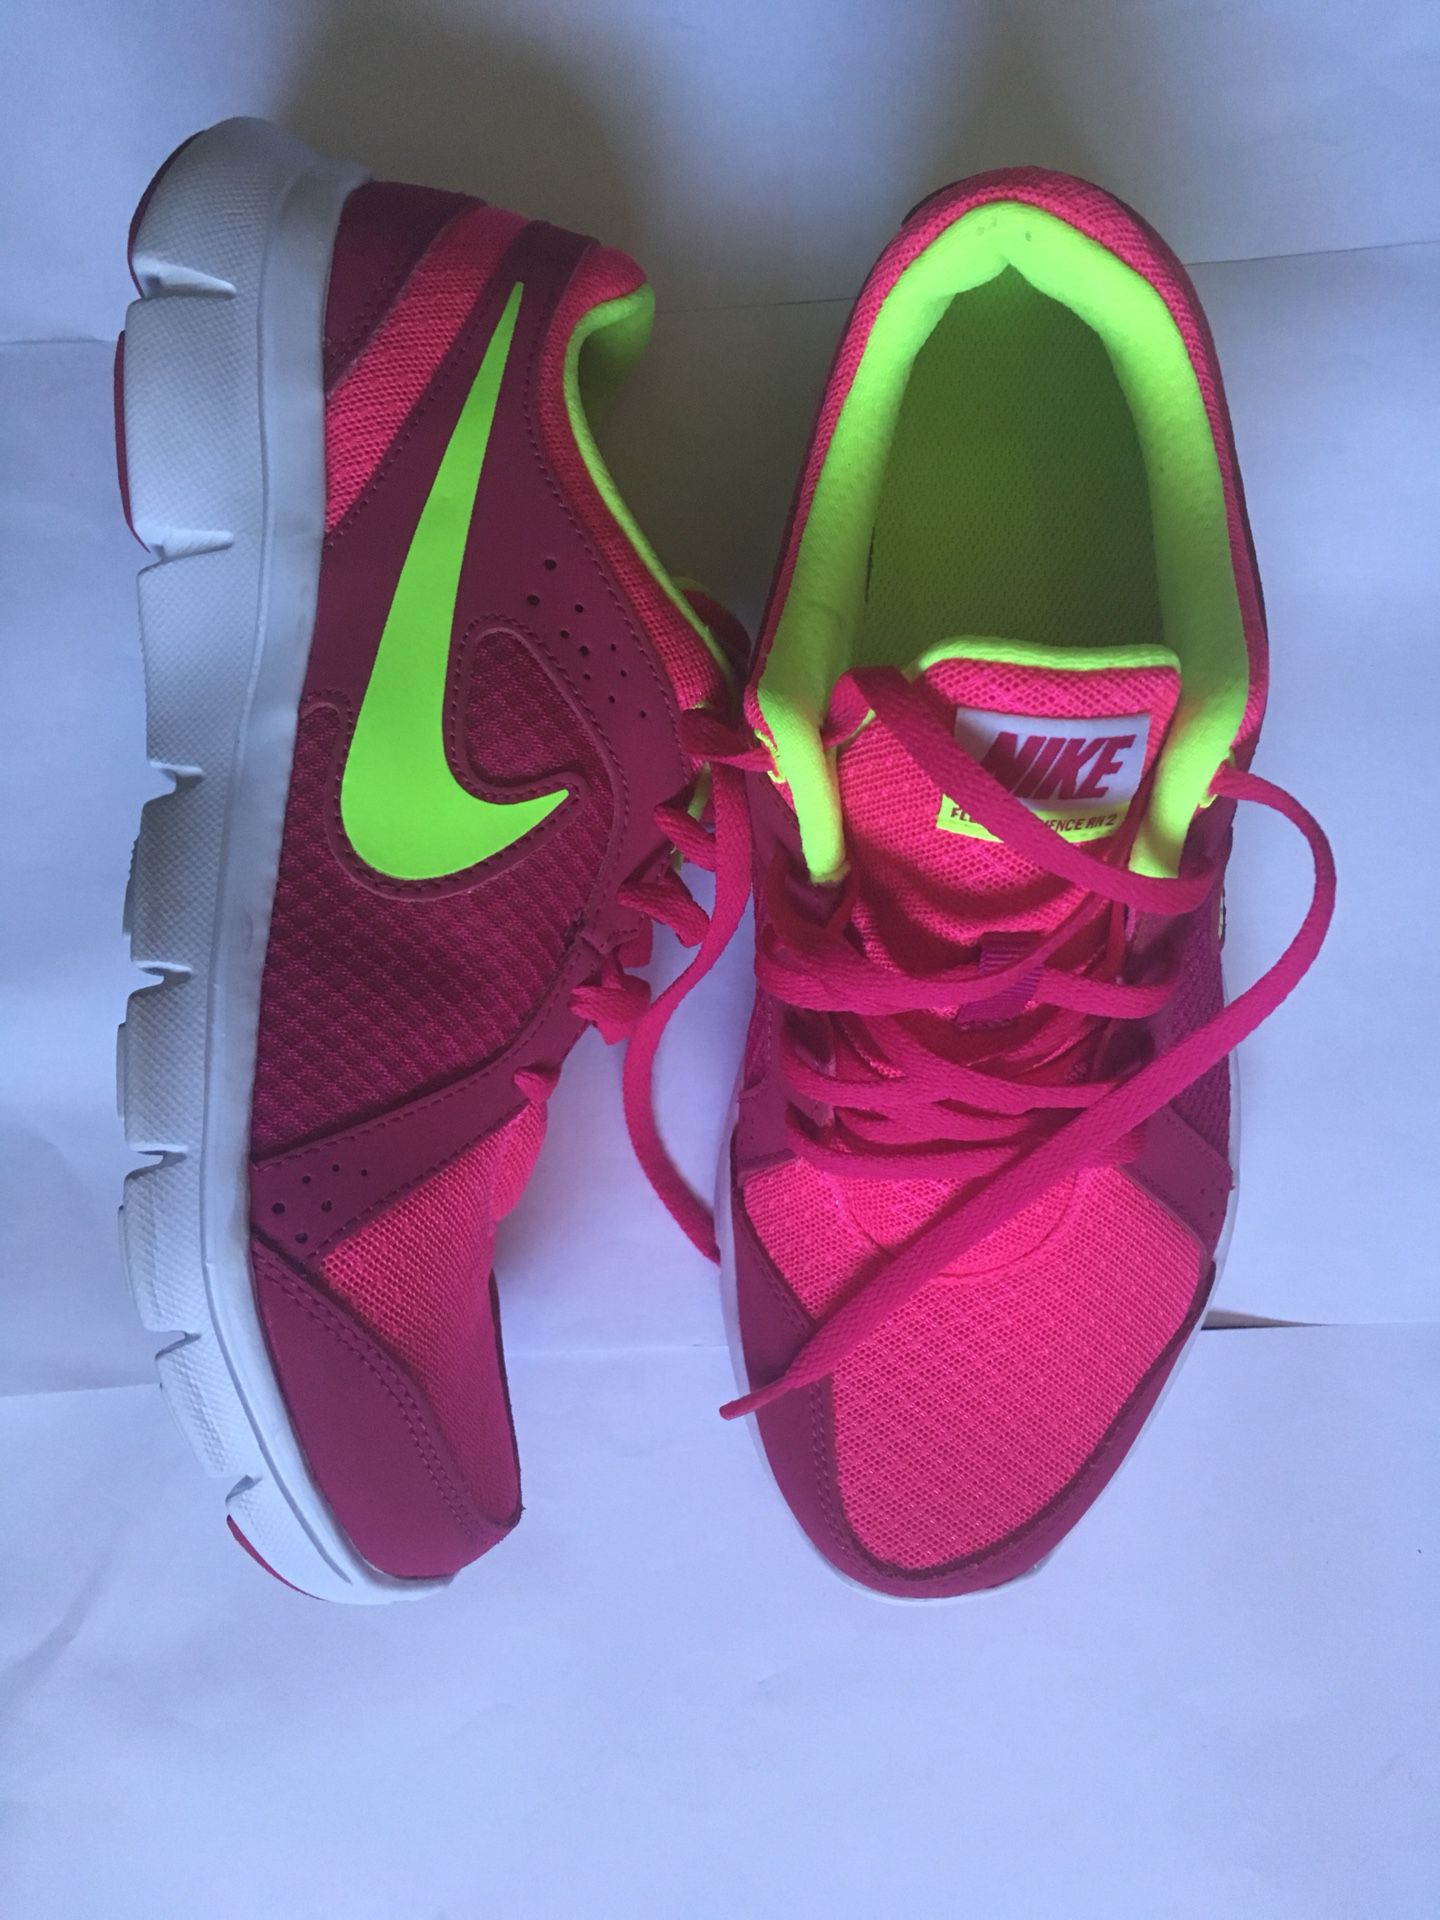 Nike shoes. Nike Experience RN 2 . Pink, Size US 5.5Y ( UK 5, EUR 38, cm 24) for Sale CO - OfferUp